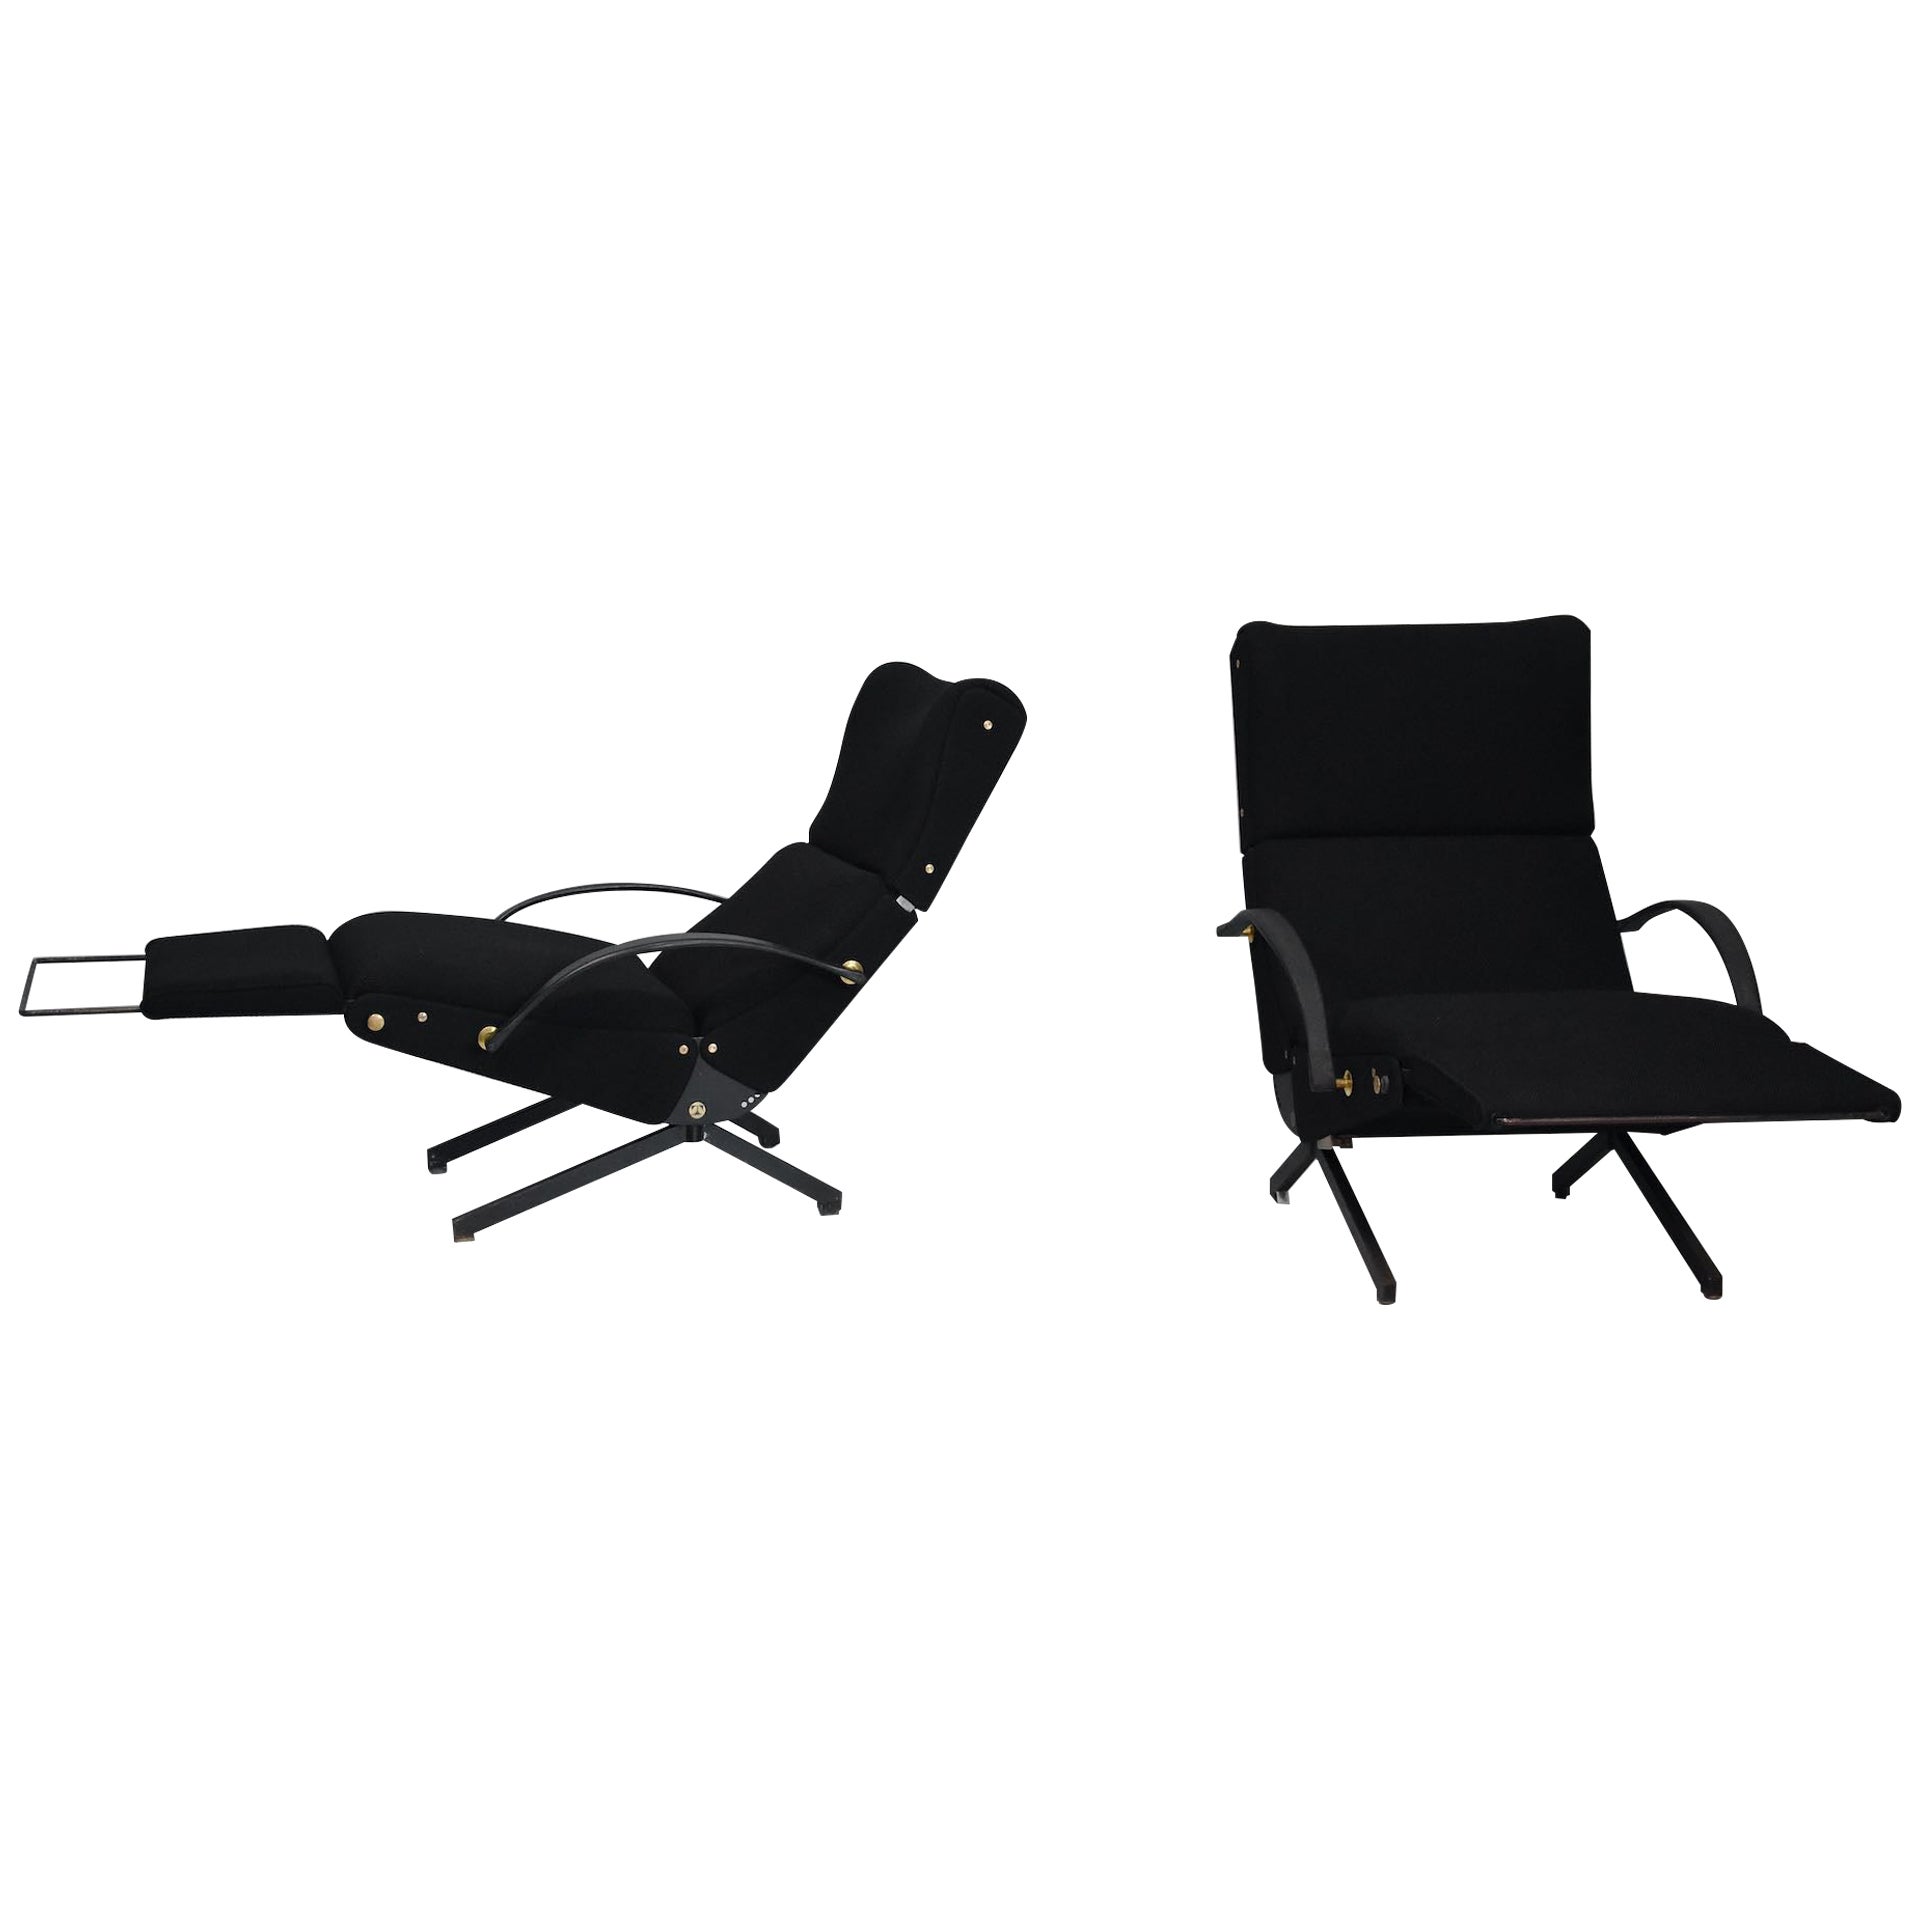 Pair of "P40" Lounge Chair by Osvaldo Borsani for Tecno 1950s For Sale